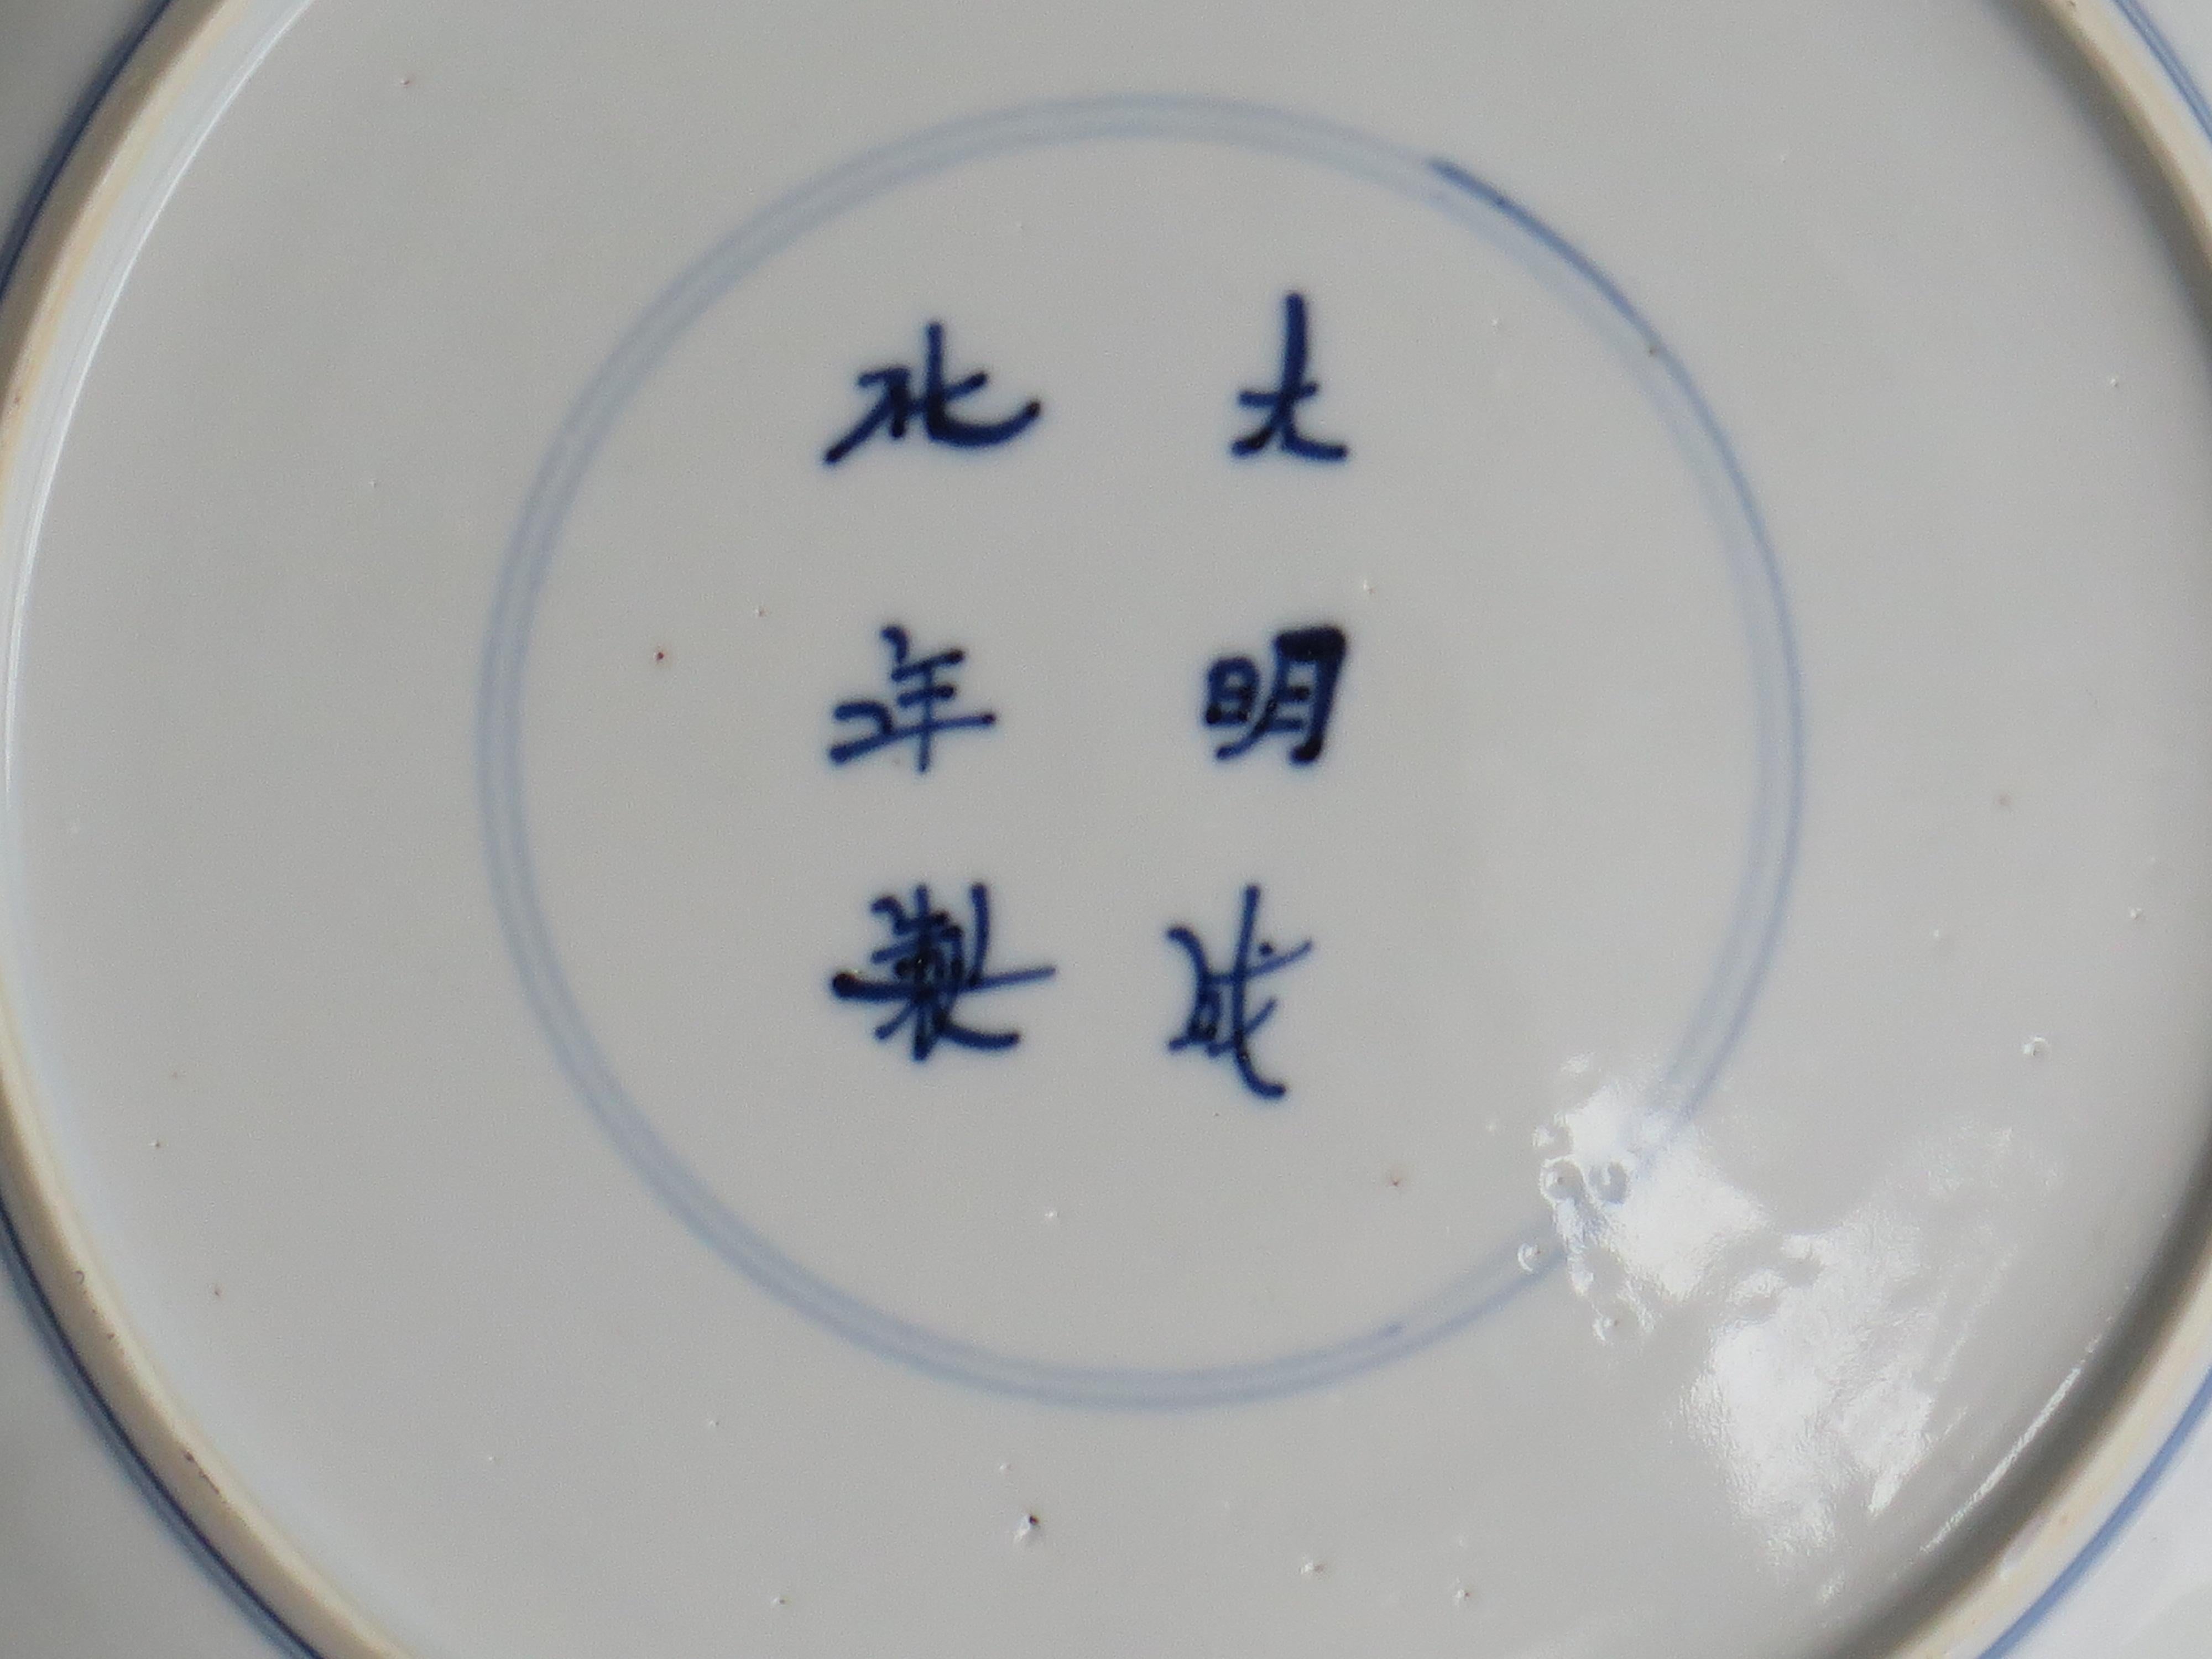 Kangxi Period Chinese Dish or Plate Porcelain Blue & White Chenghua Mark Ca 1680 For Sale 5